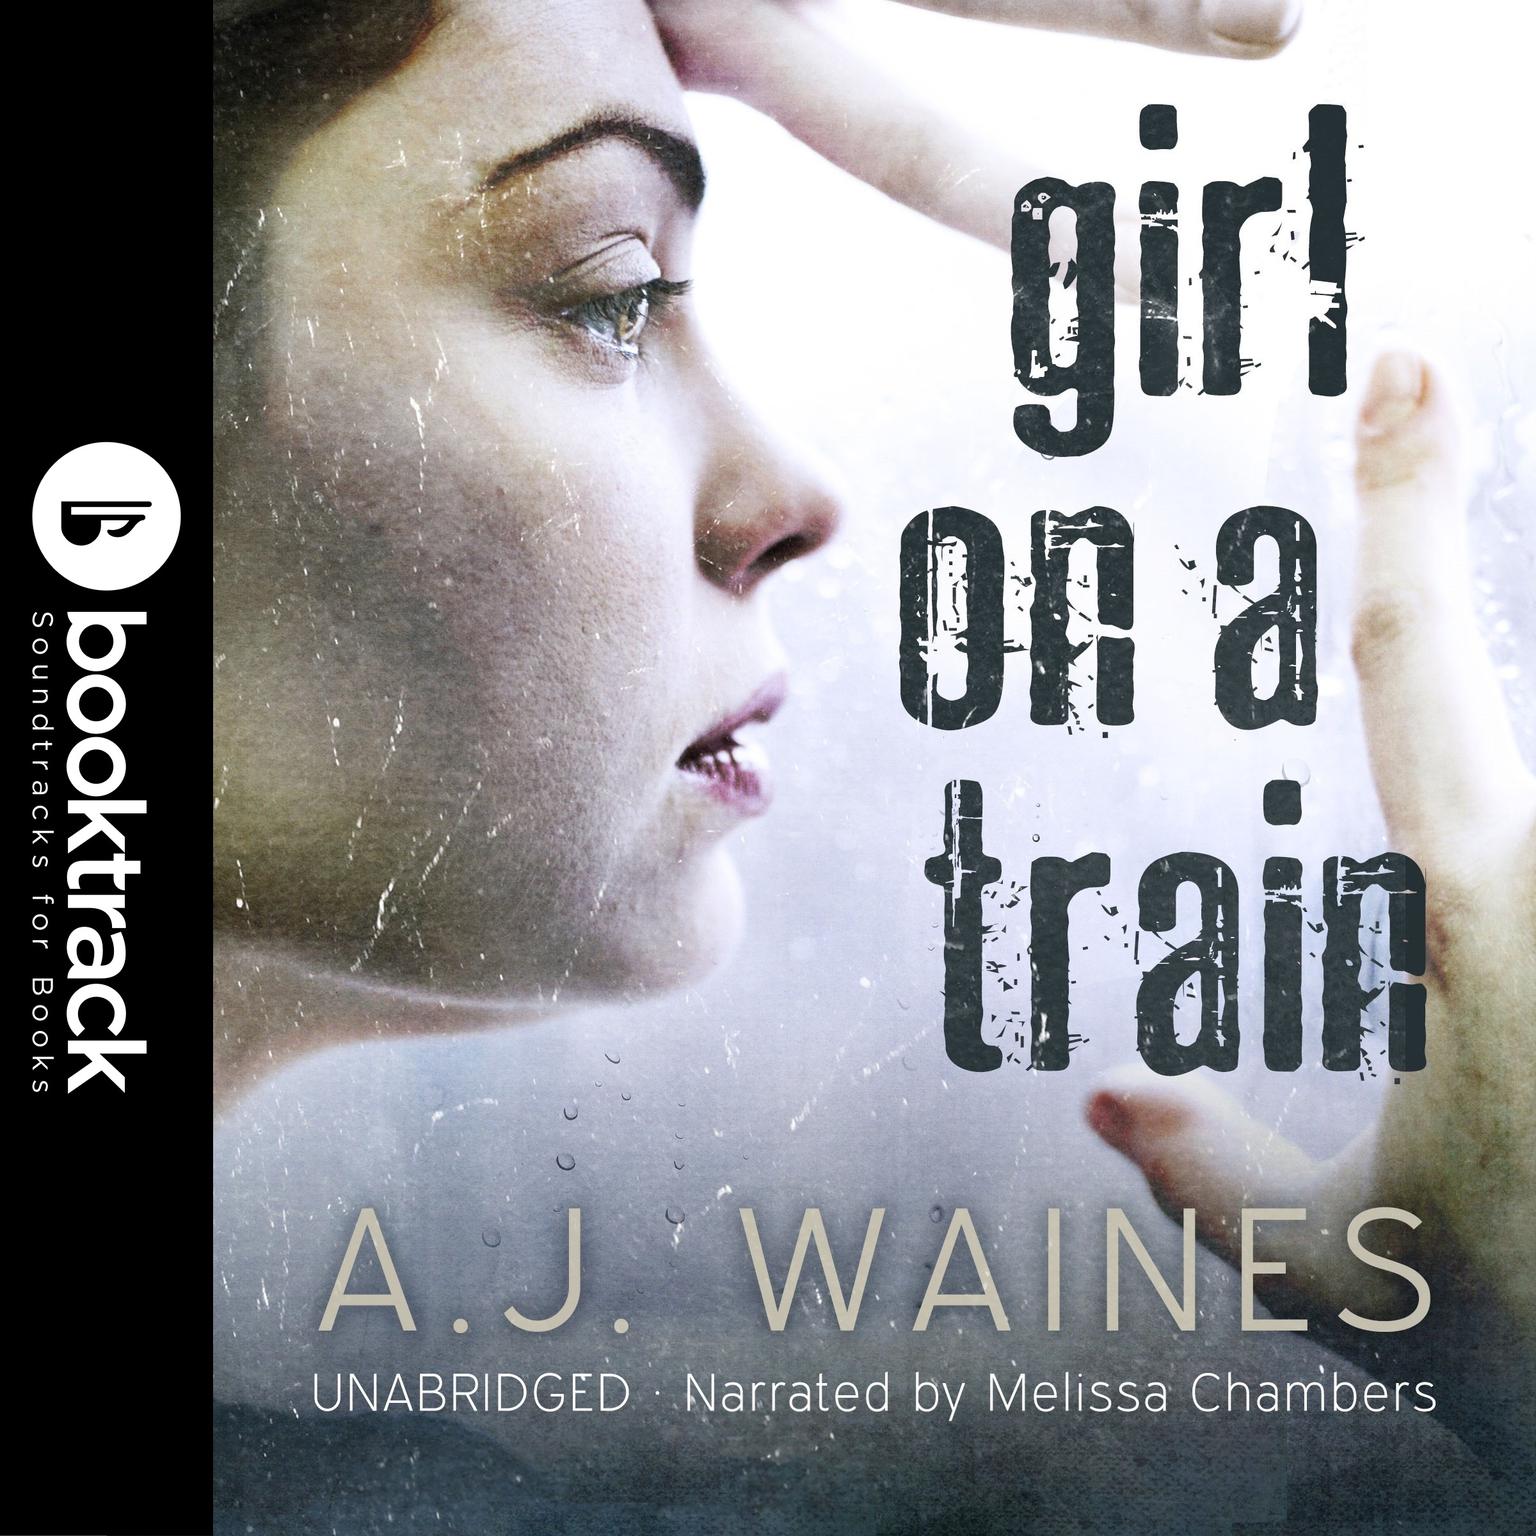 Girl on a Train [Booktrack Soundtrack Edition] Audiobook, by A. J.  Waines